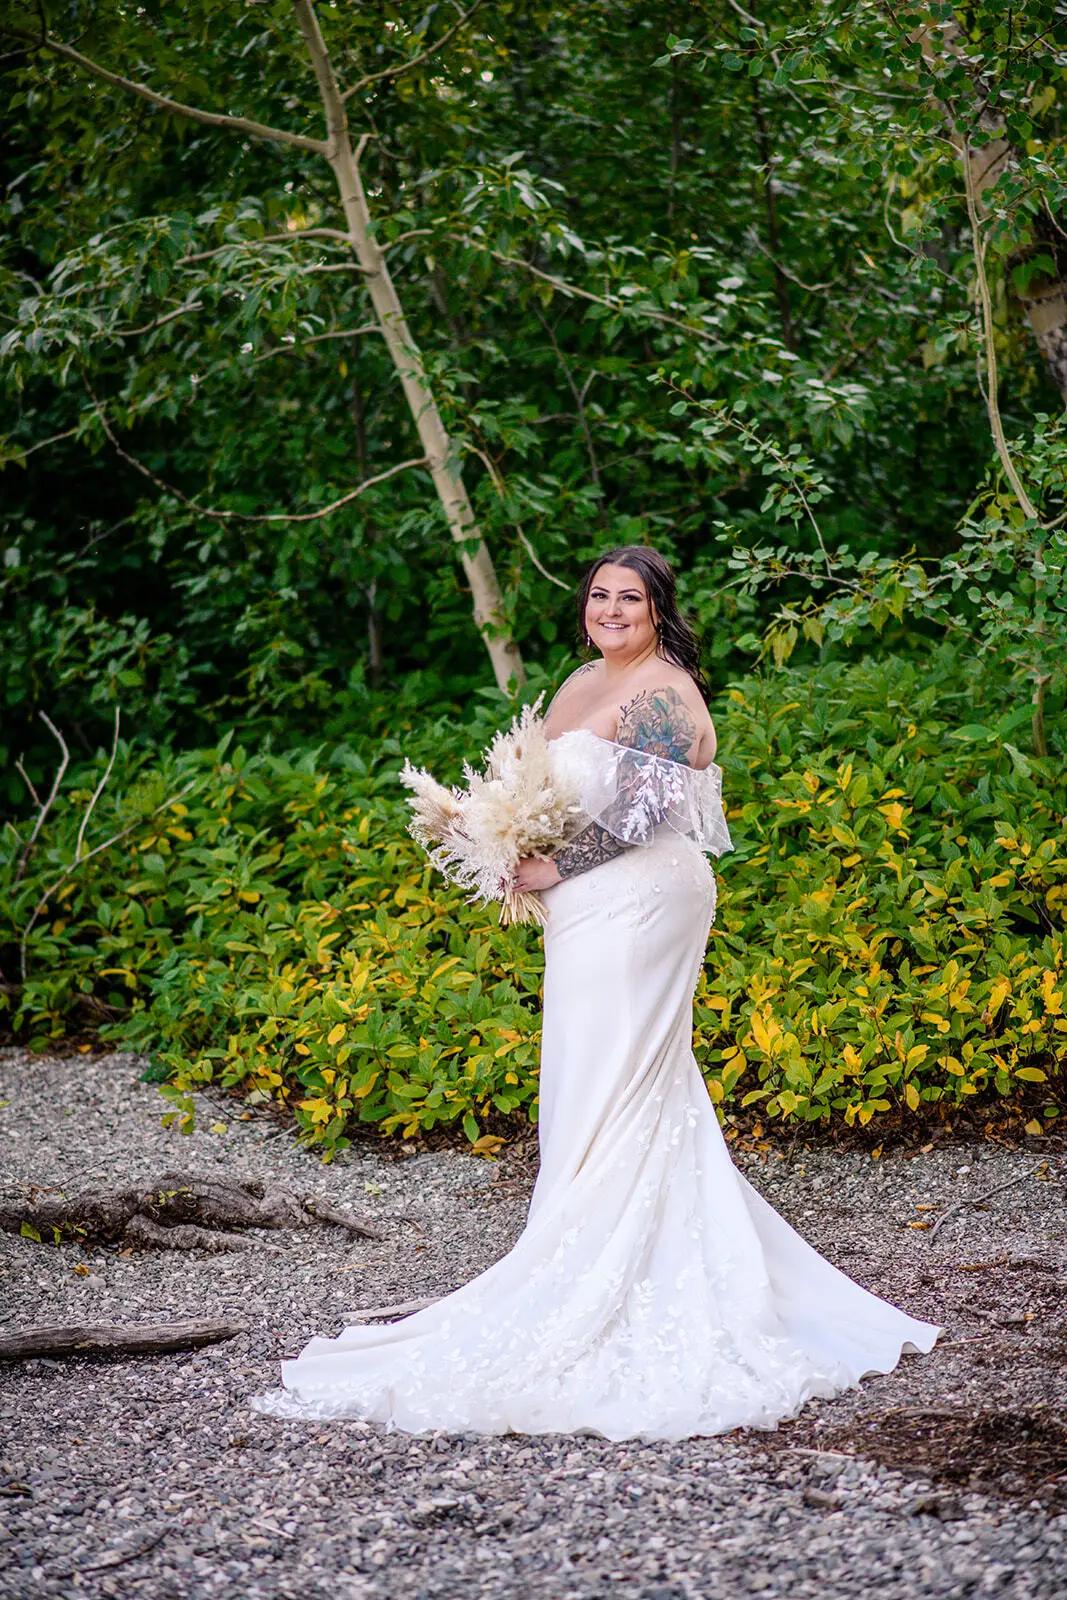 Bride wedding photo by Carrie Ann Photography